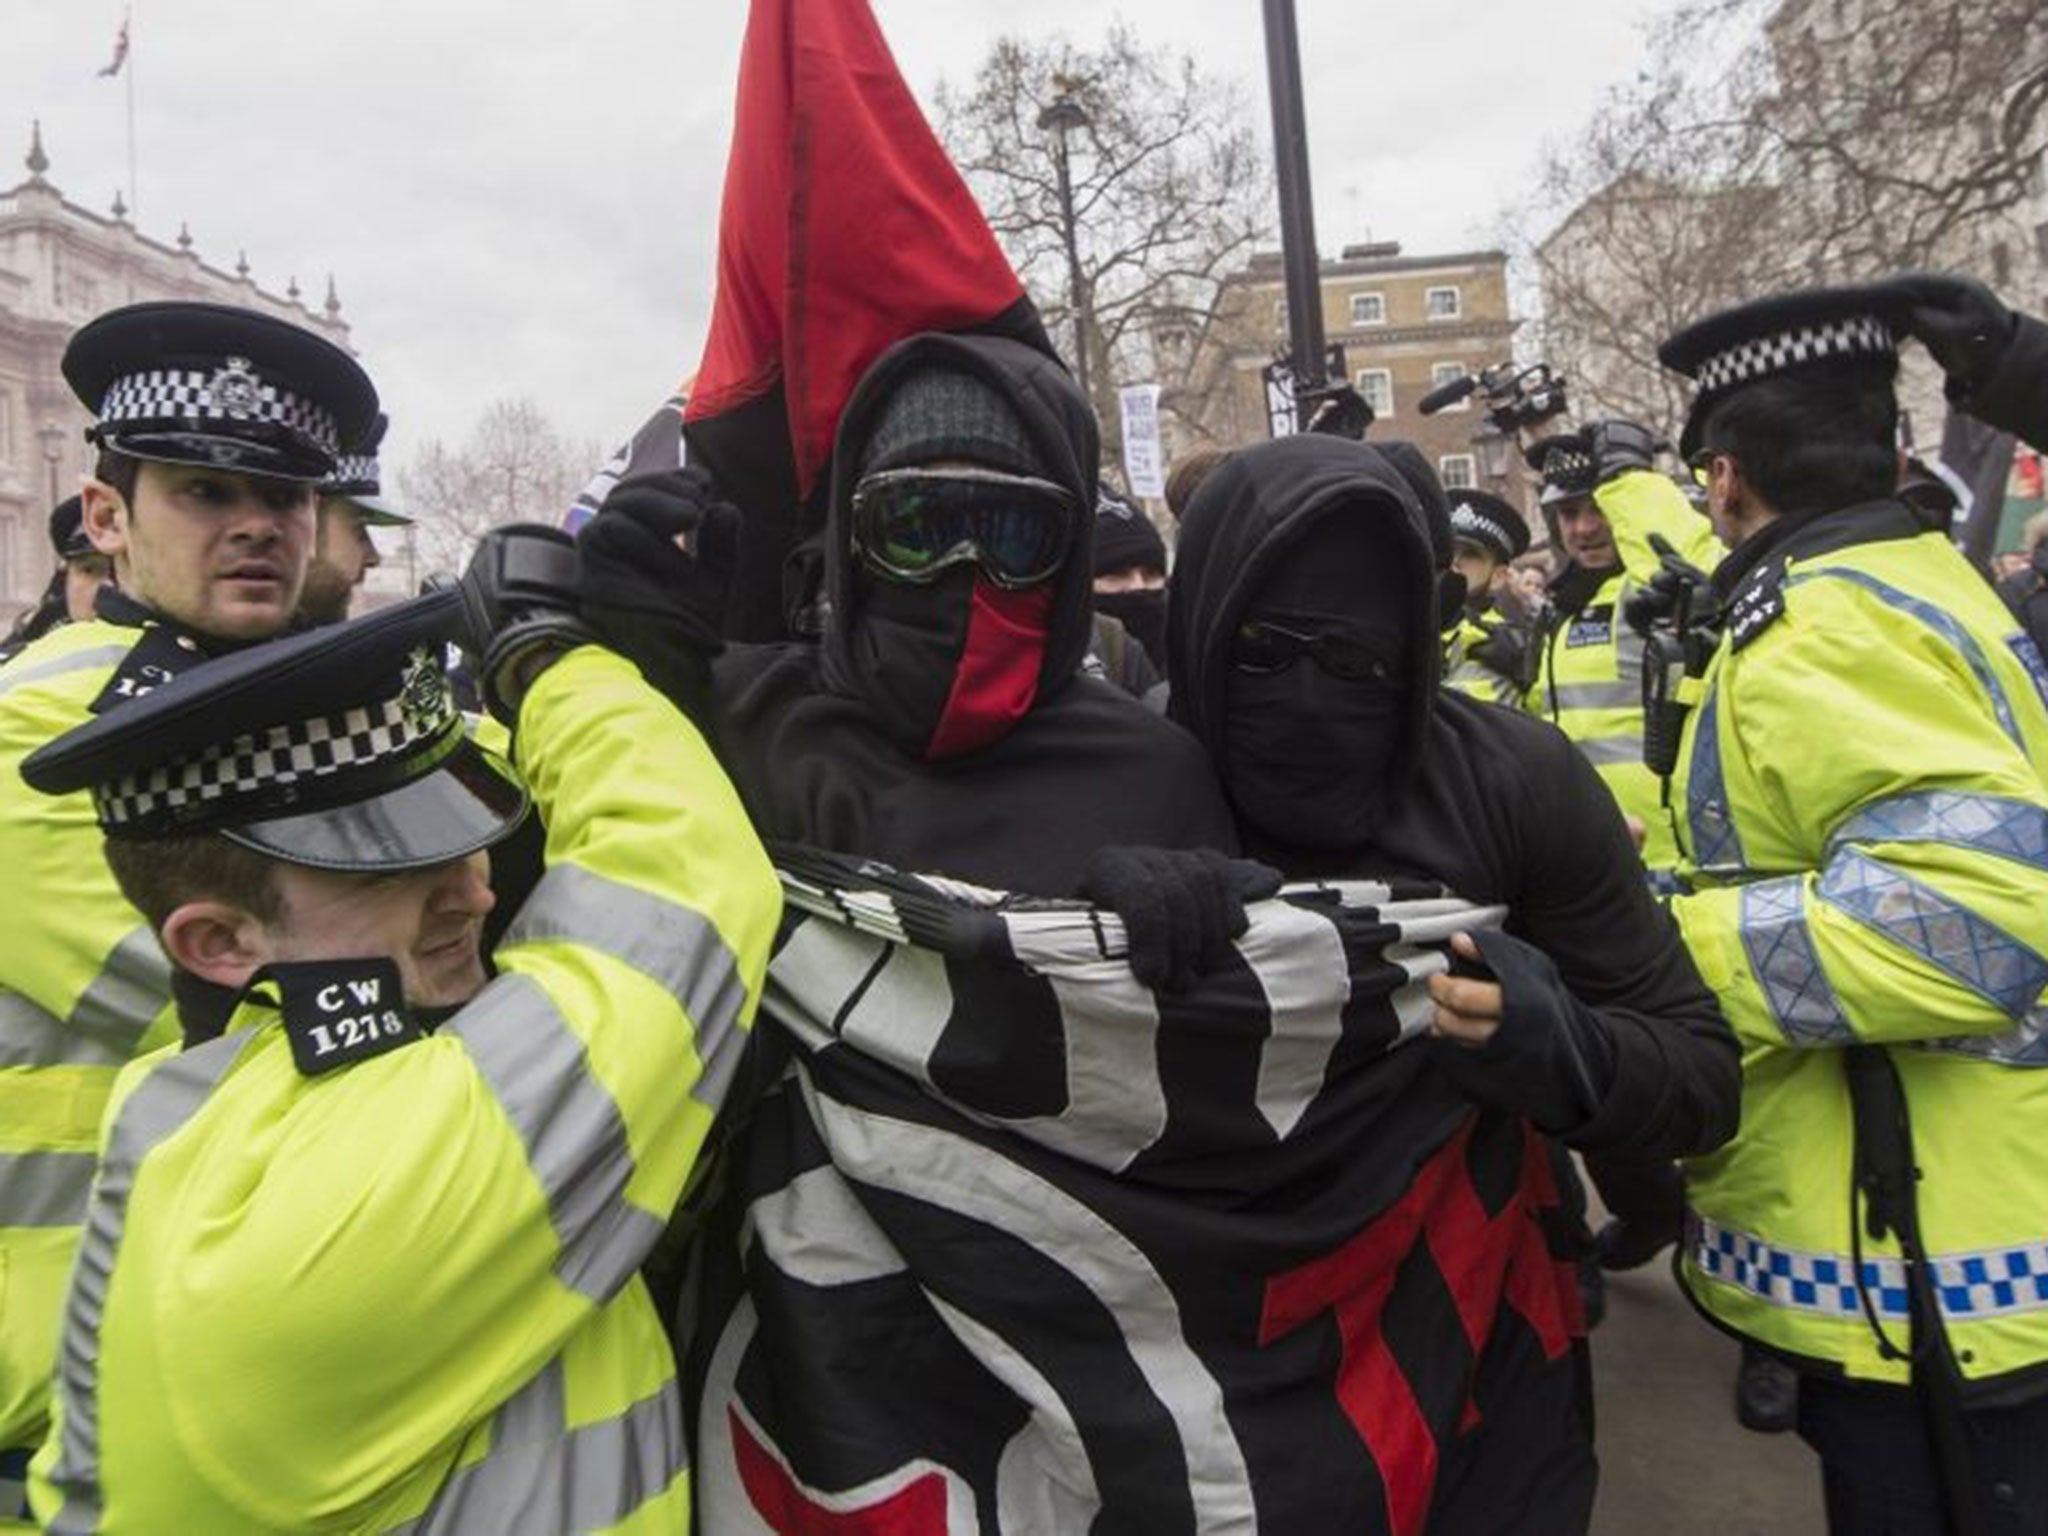 Police officers scuffle with anti-fascists on Whitehall during a rally by the British off-shoot of the Pegida movement in central London on April 4